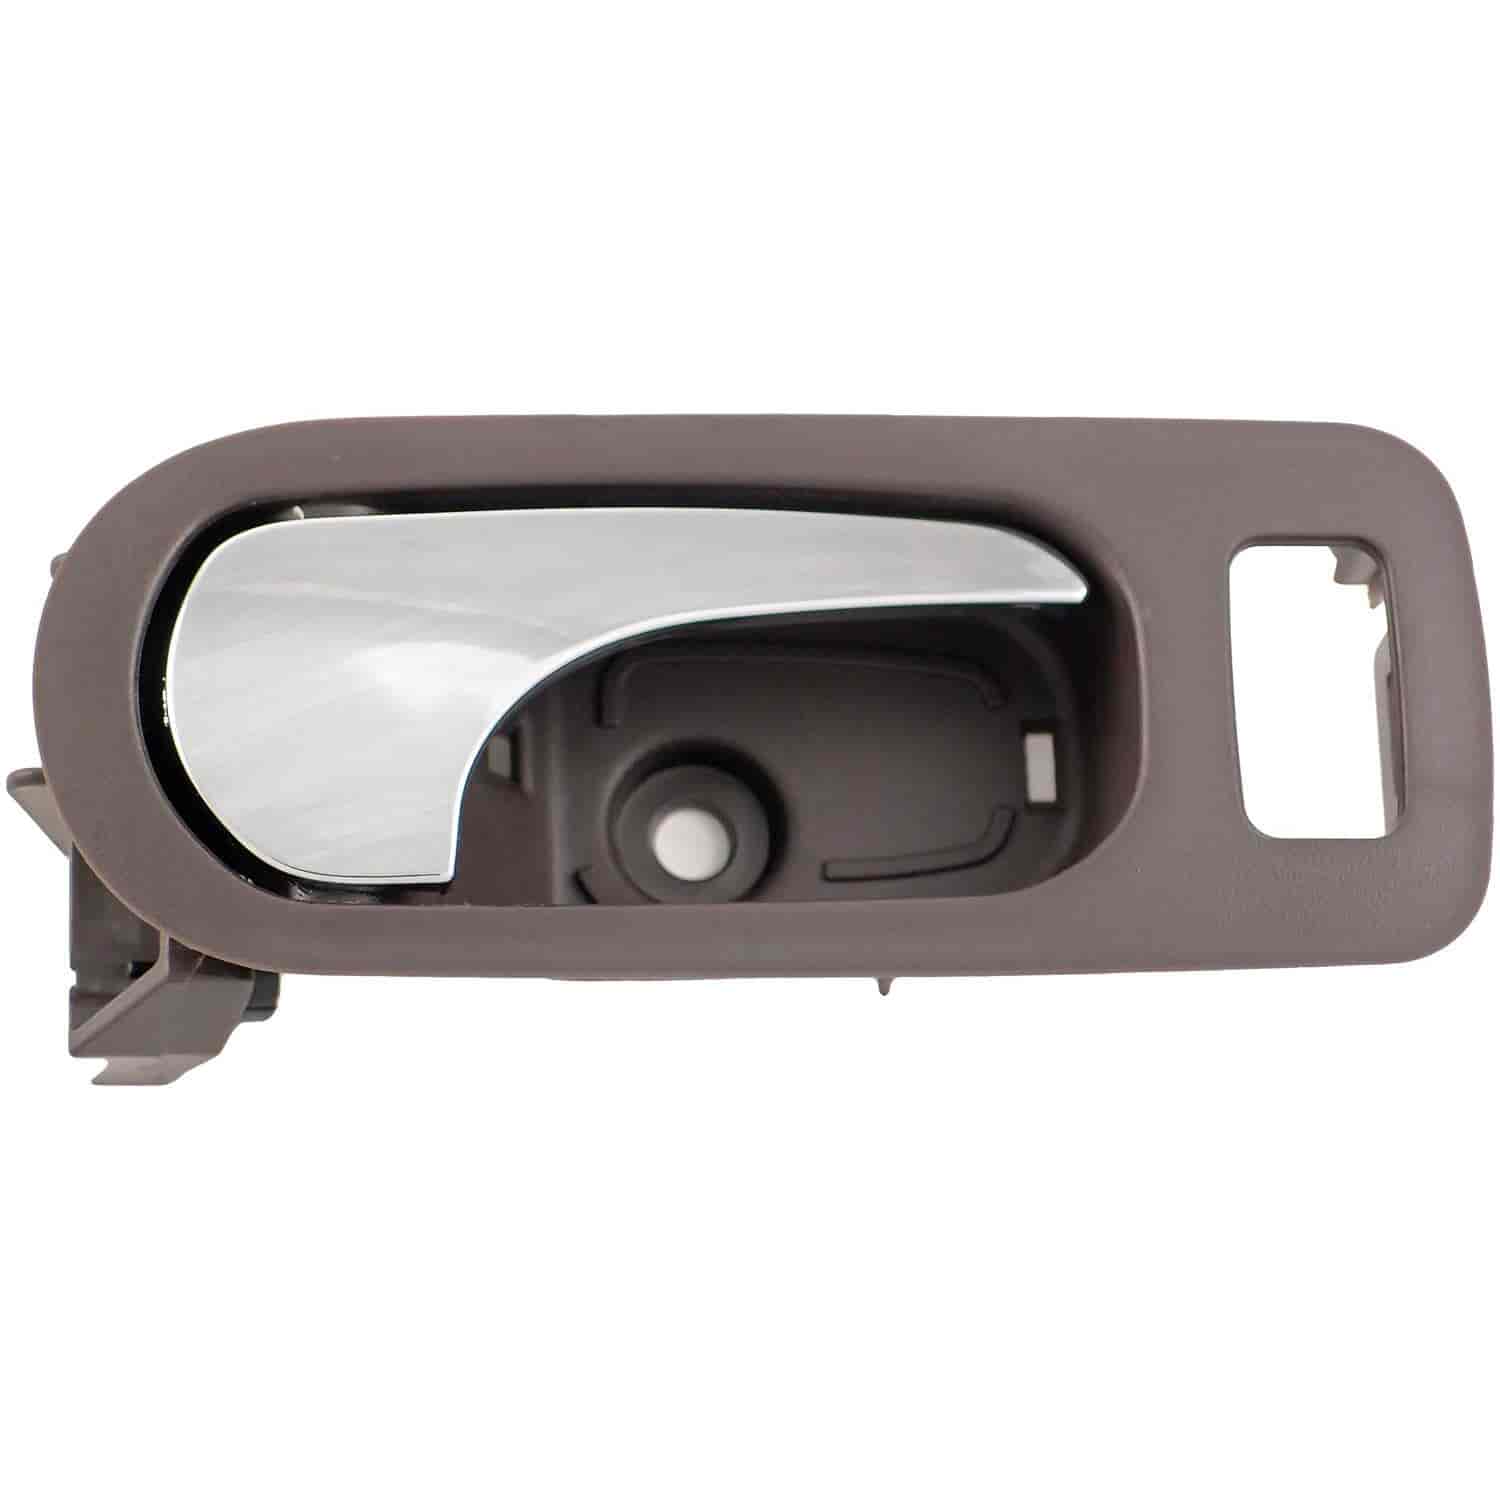 Interior Door Handle - Rear Right - Chrome Lever+Brown Housing Cocoa